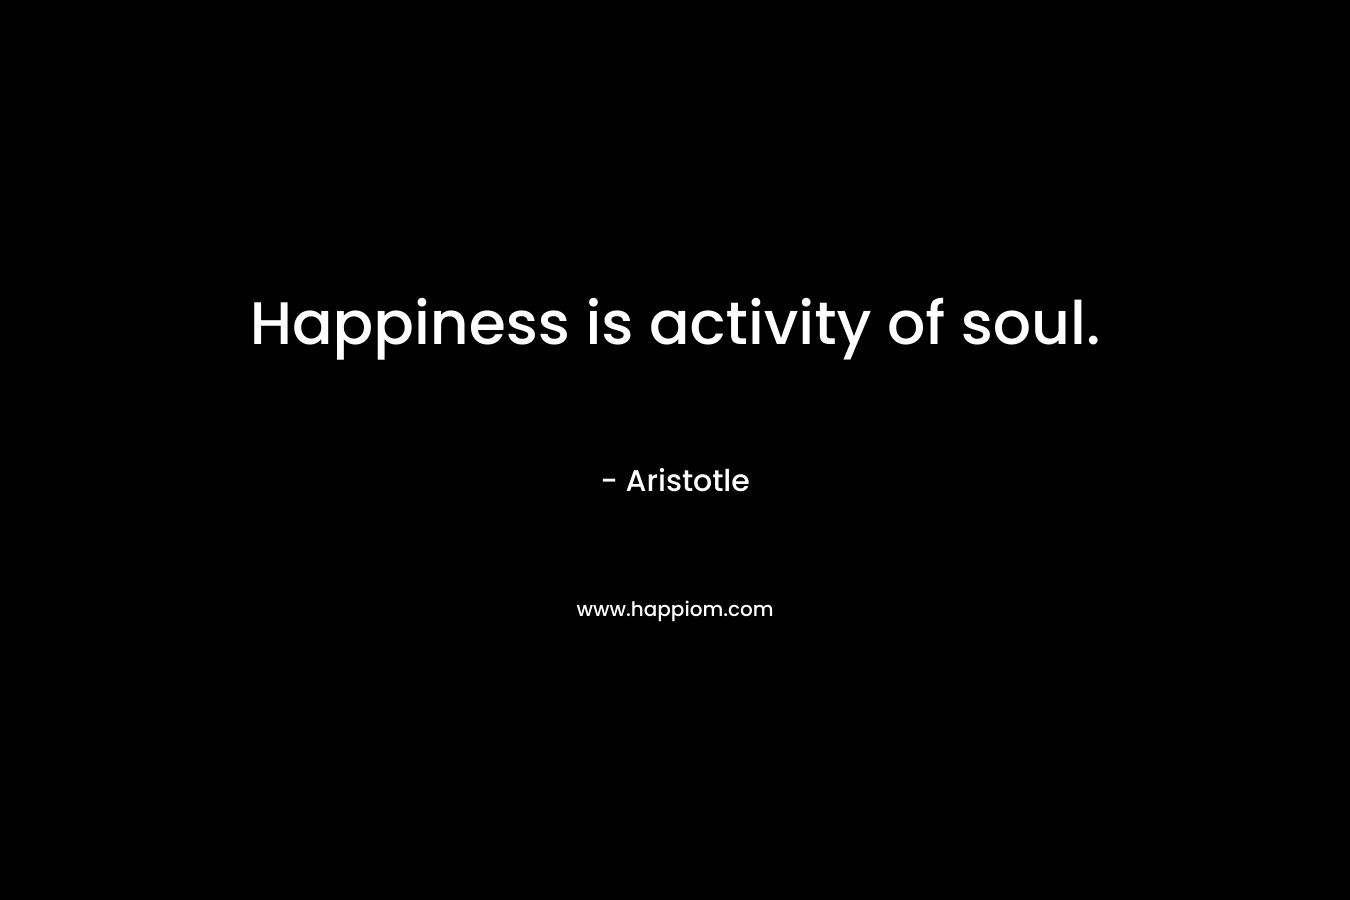 Happiness is activity of soul.